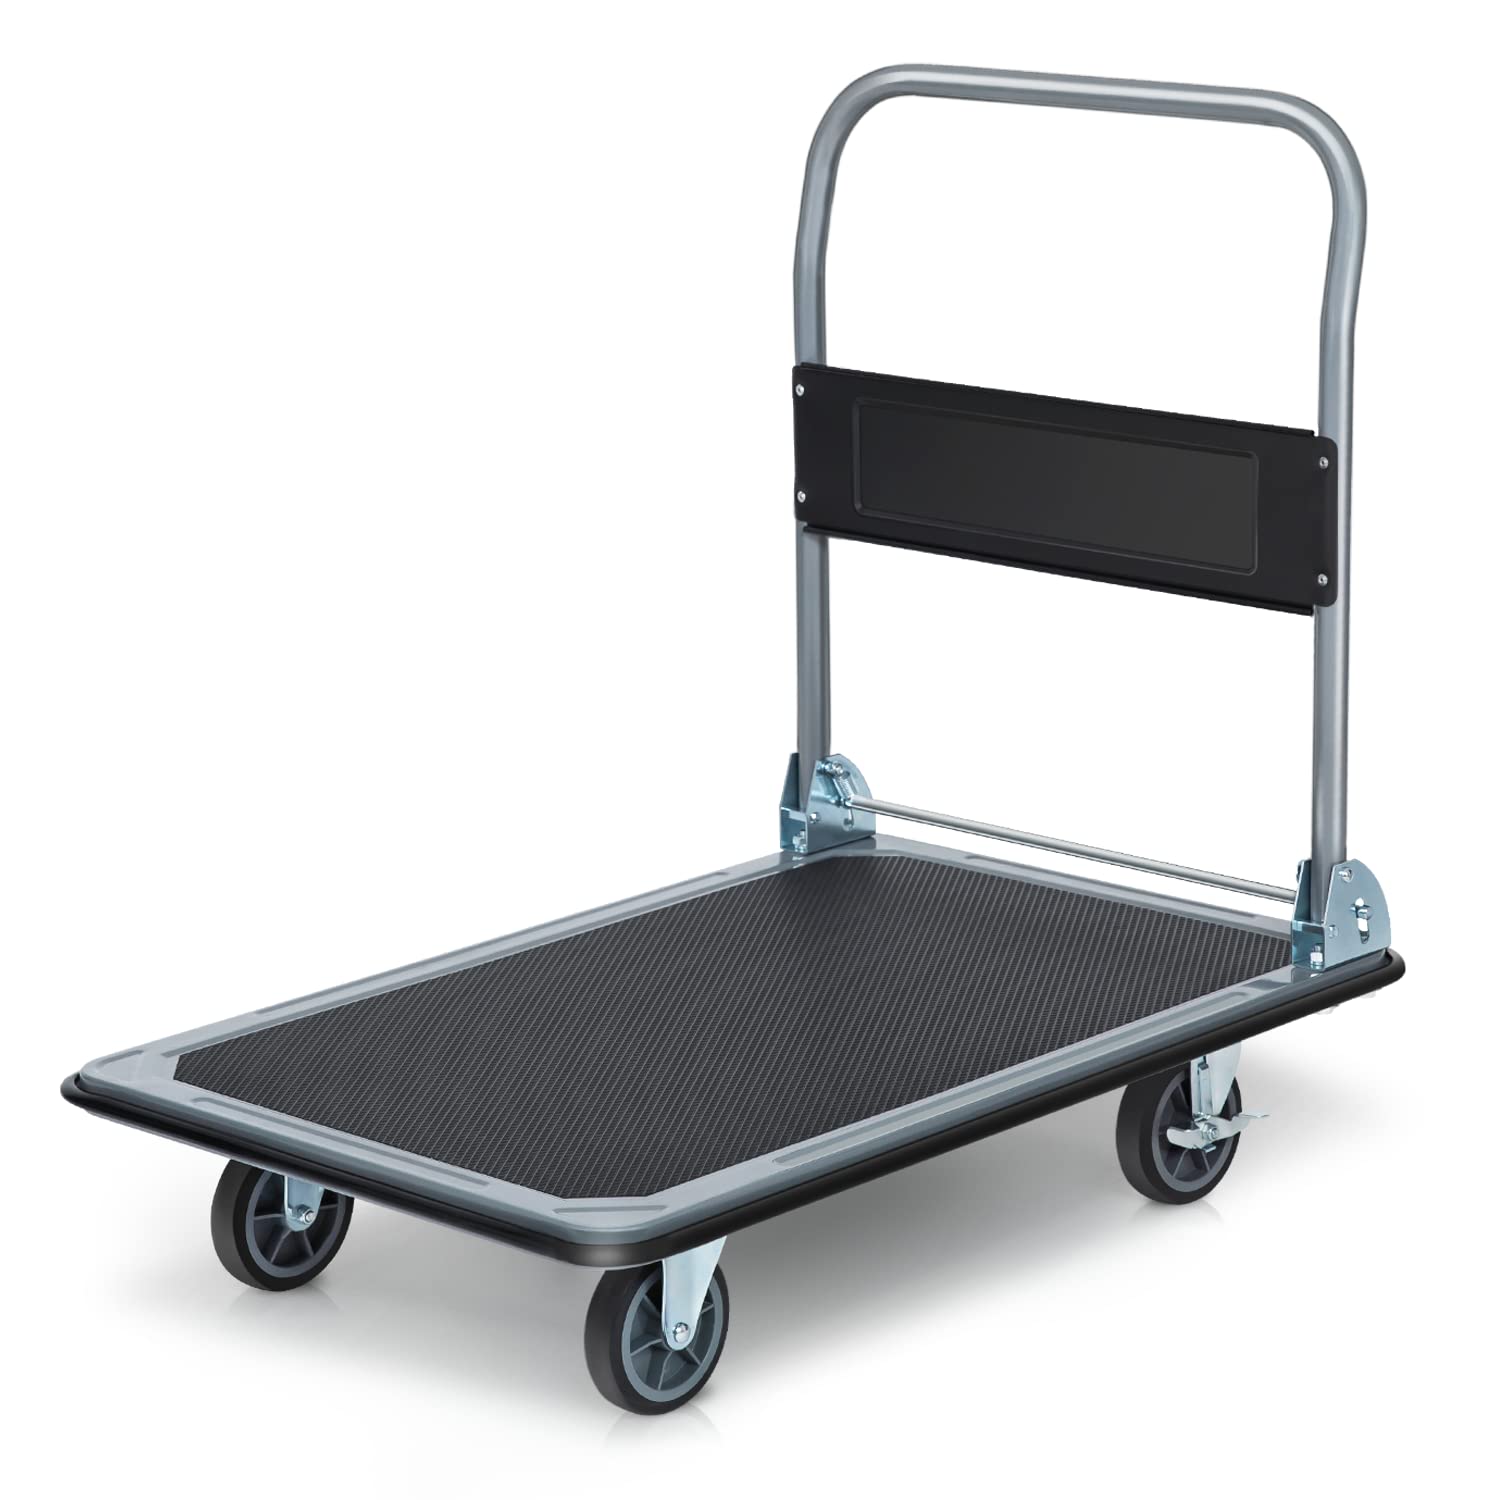 Magshion Platform Hand Truck Cart, High Carbon Steel Folding & Rolling Flatbed Cart with 4 Heavy-Duty Casters Load Capacity 661LBS for Home, Office Loading (Black)